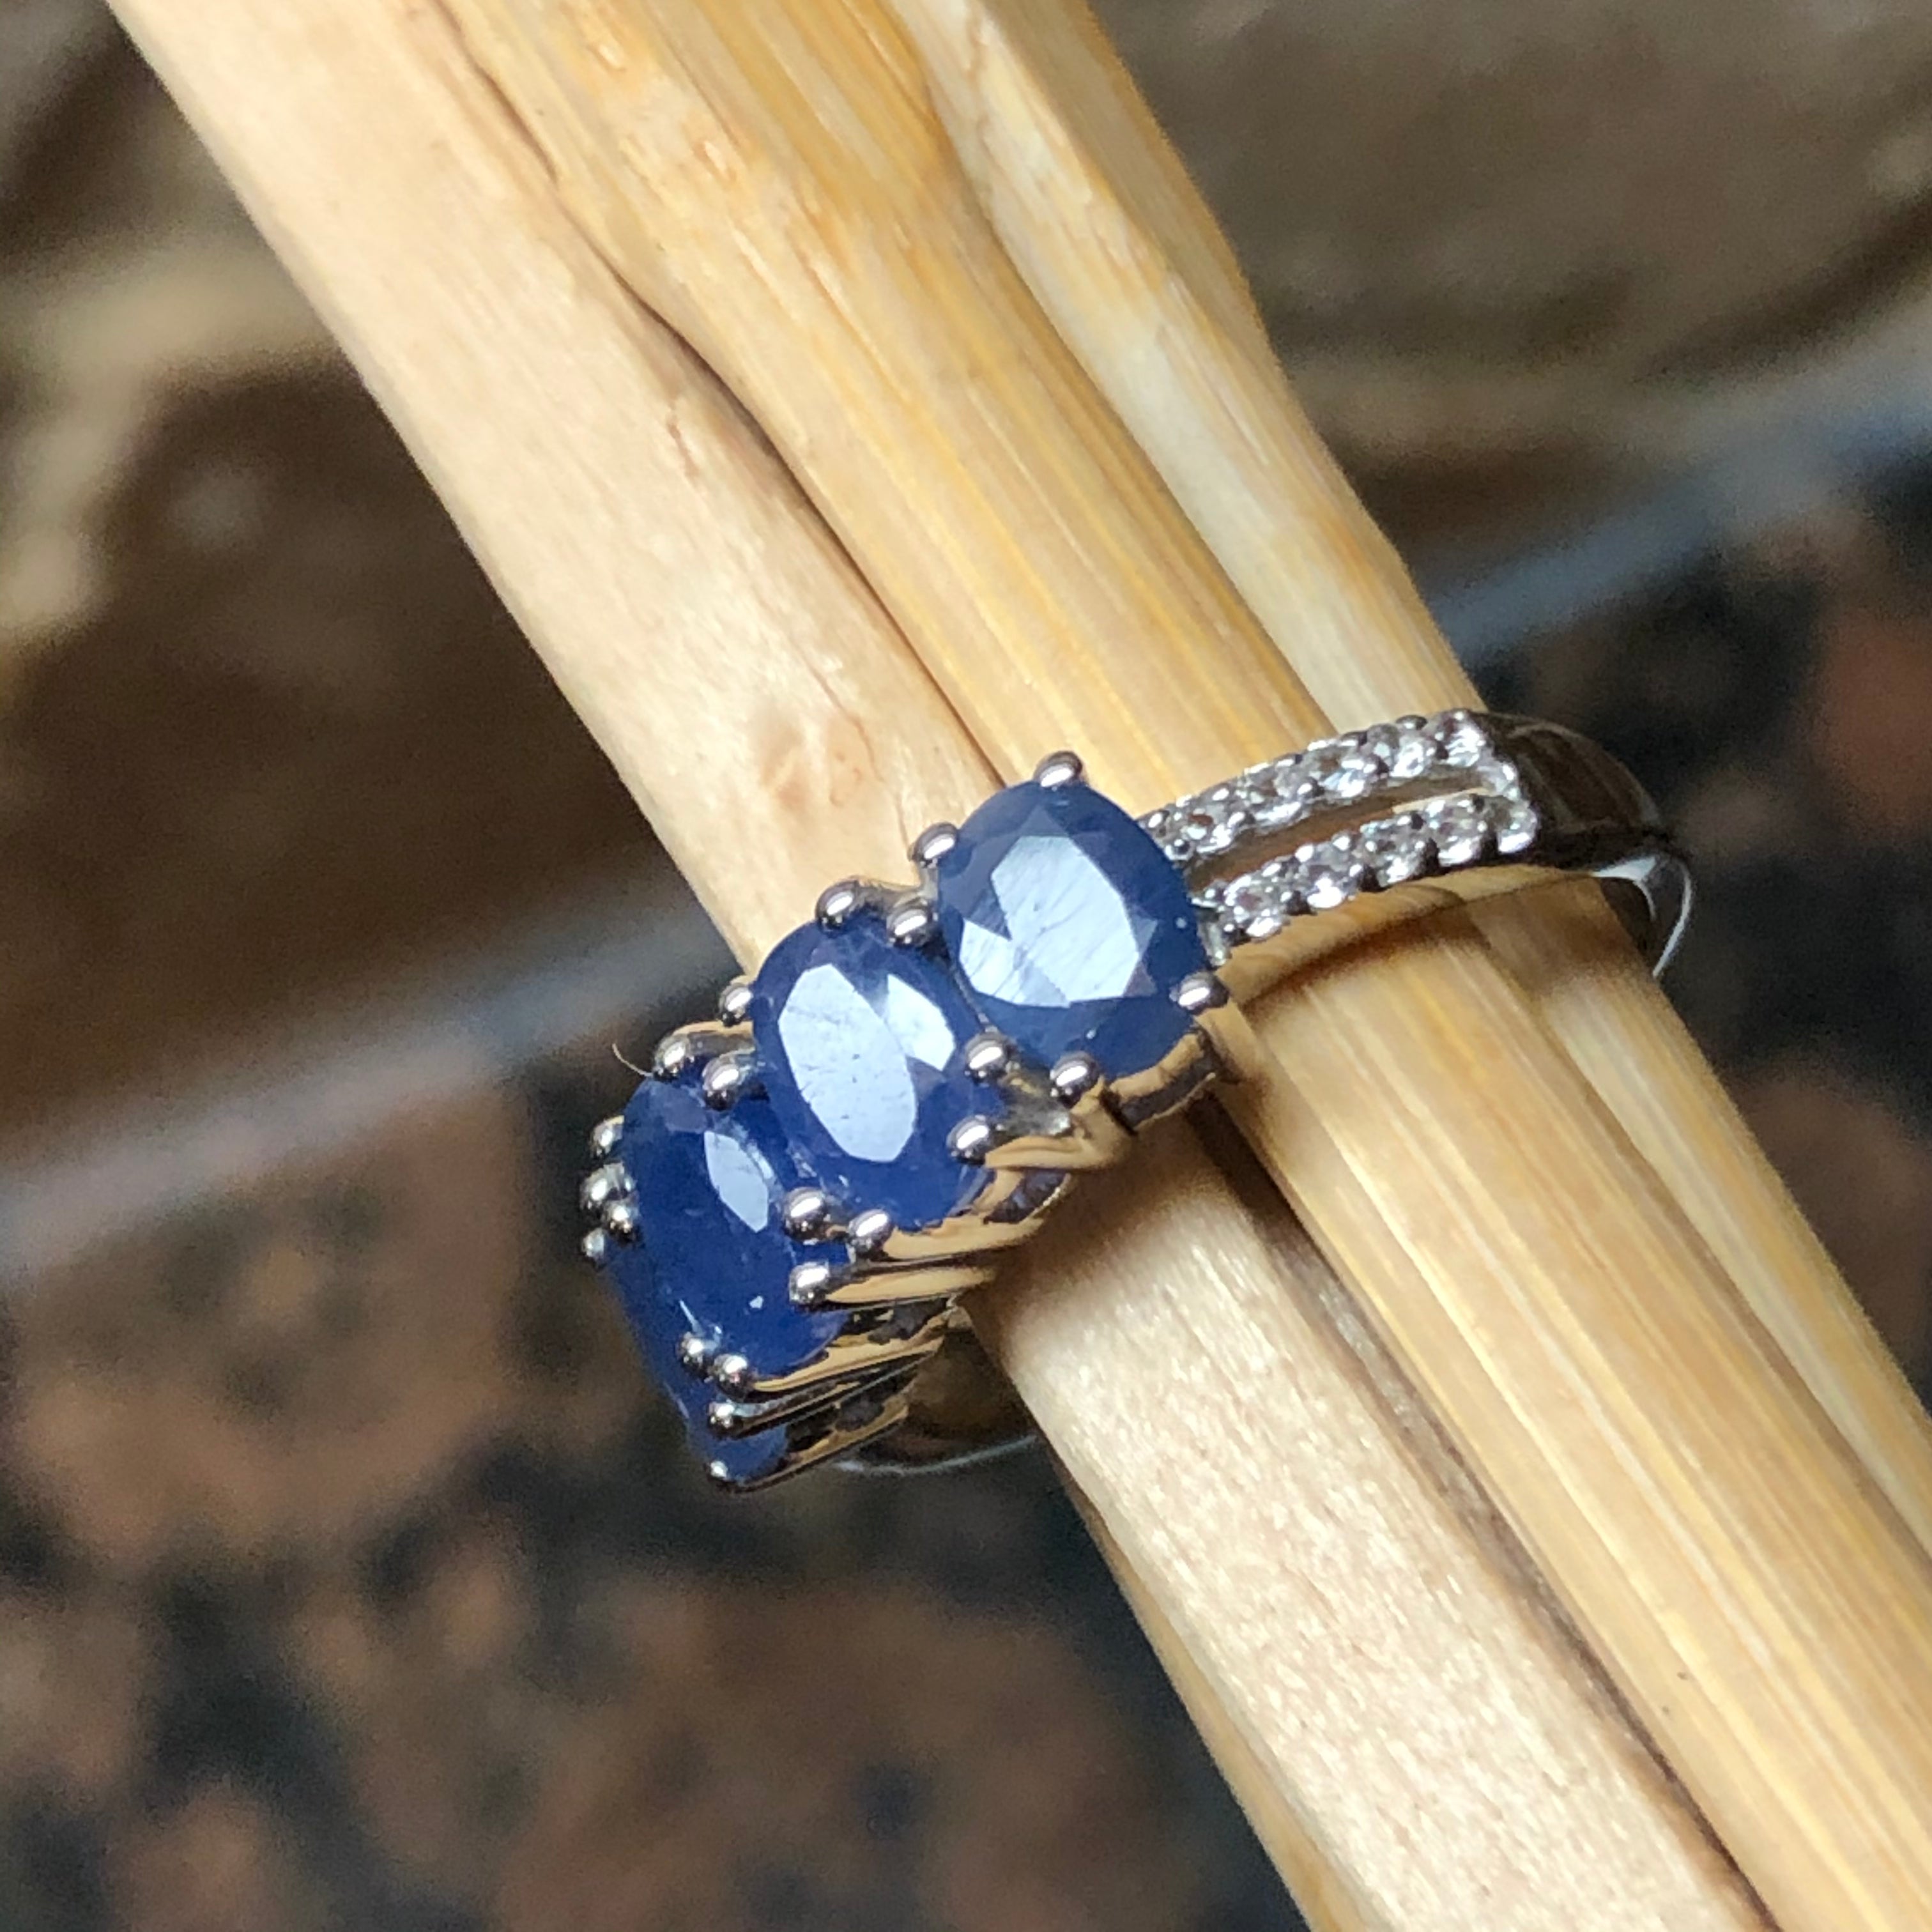 Natural Blue Sapphire 925 Solid Sterling Silver Ring Size 6, 7, 8, 9 - Natural Rocks by Kala